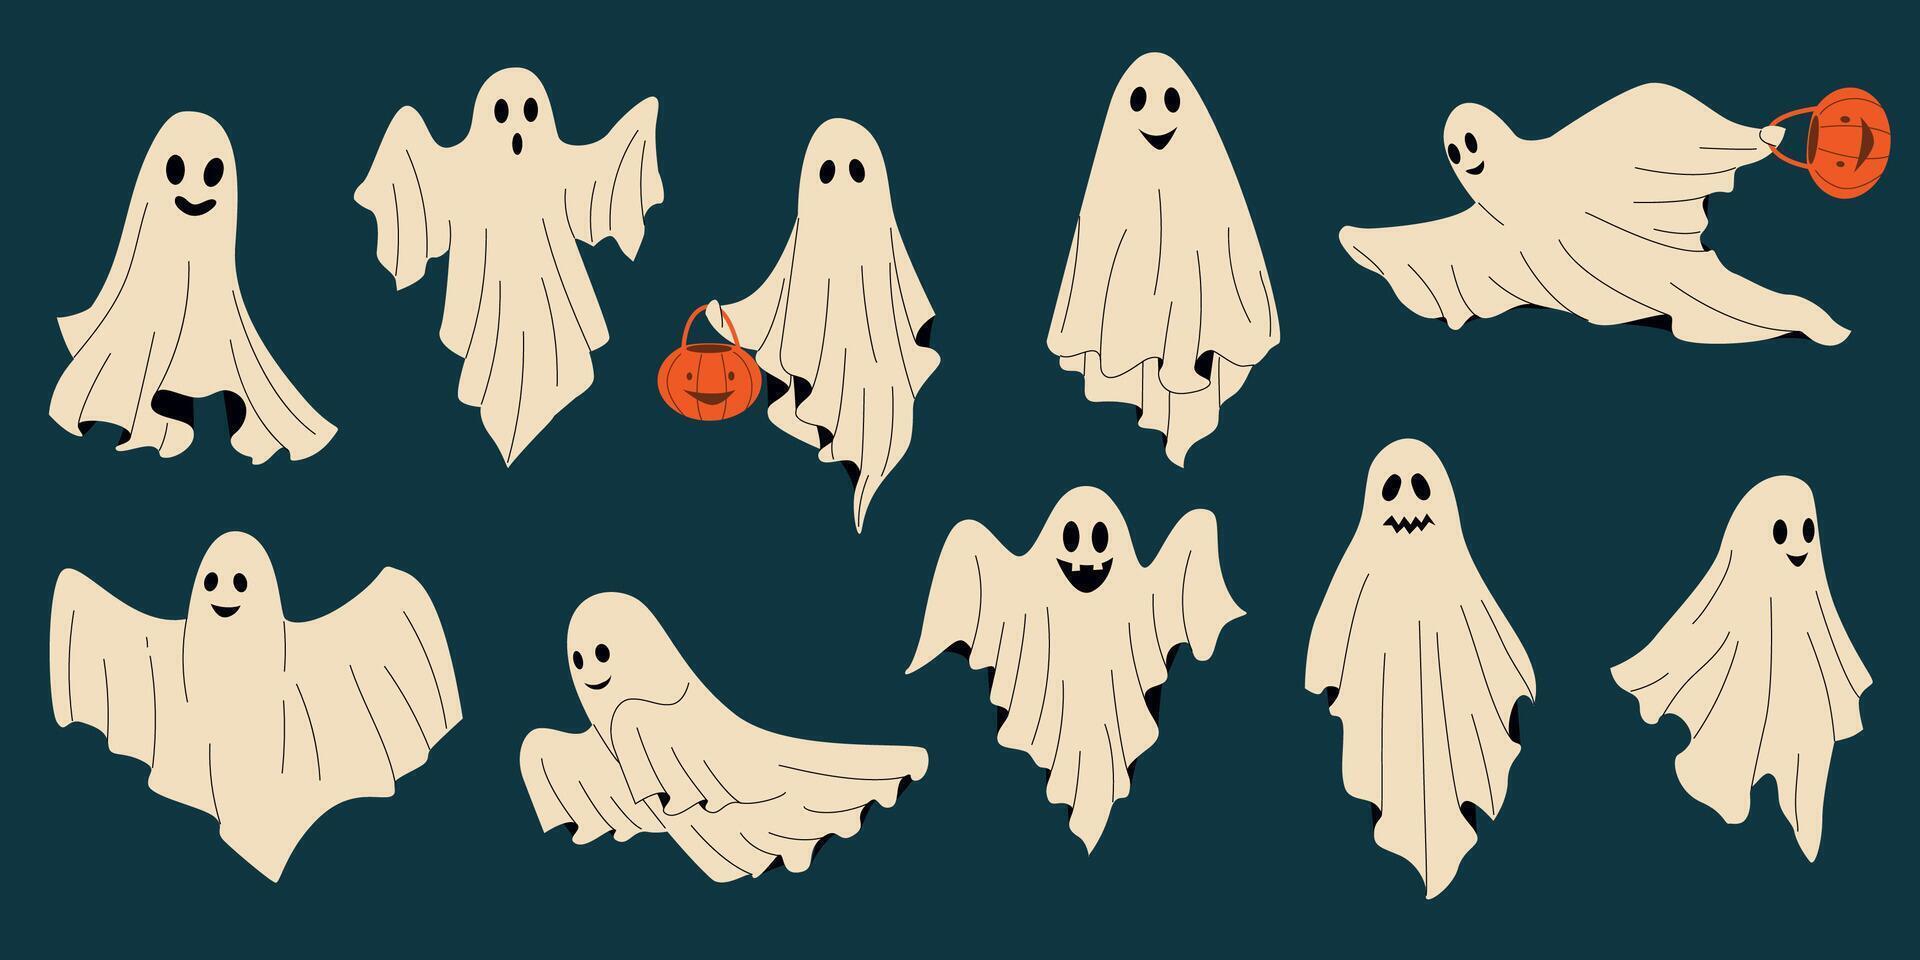 Funny phantom. Cute scary monster in white sheets, cartoon scary monster faces with expressions and emotions. Vector Halloween characters